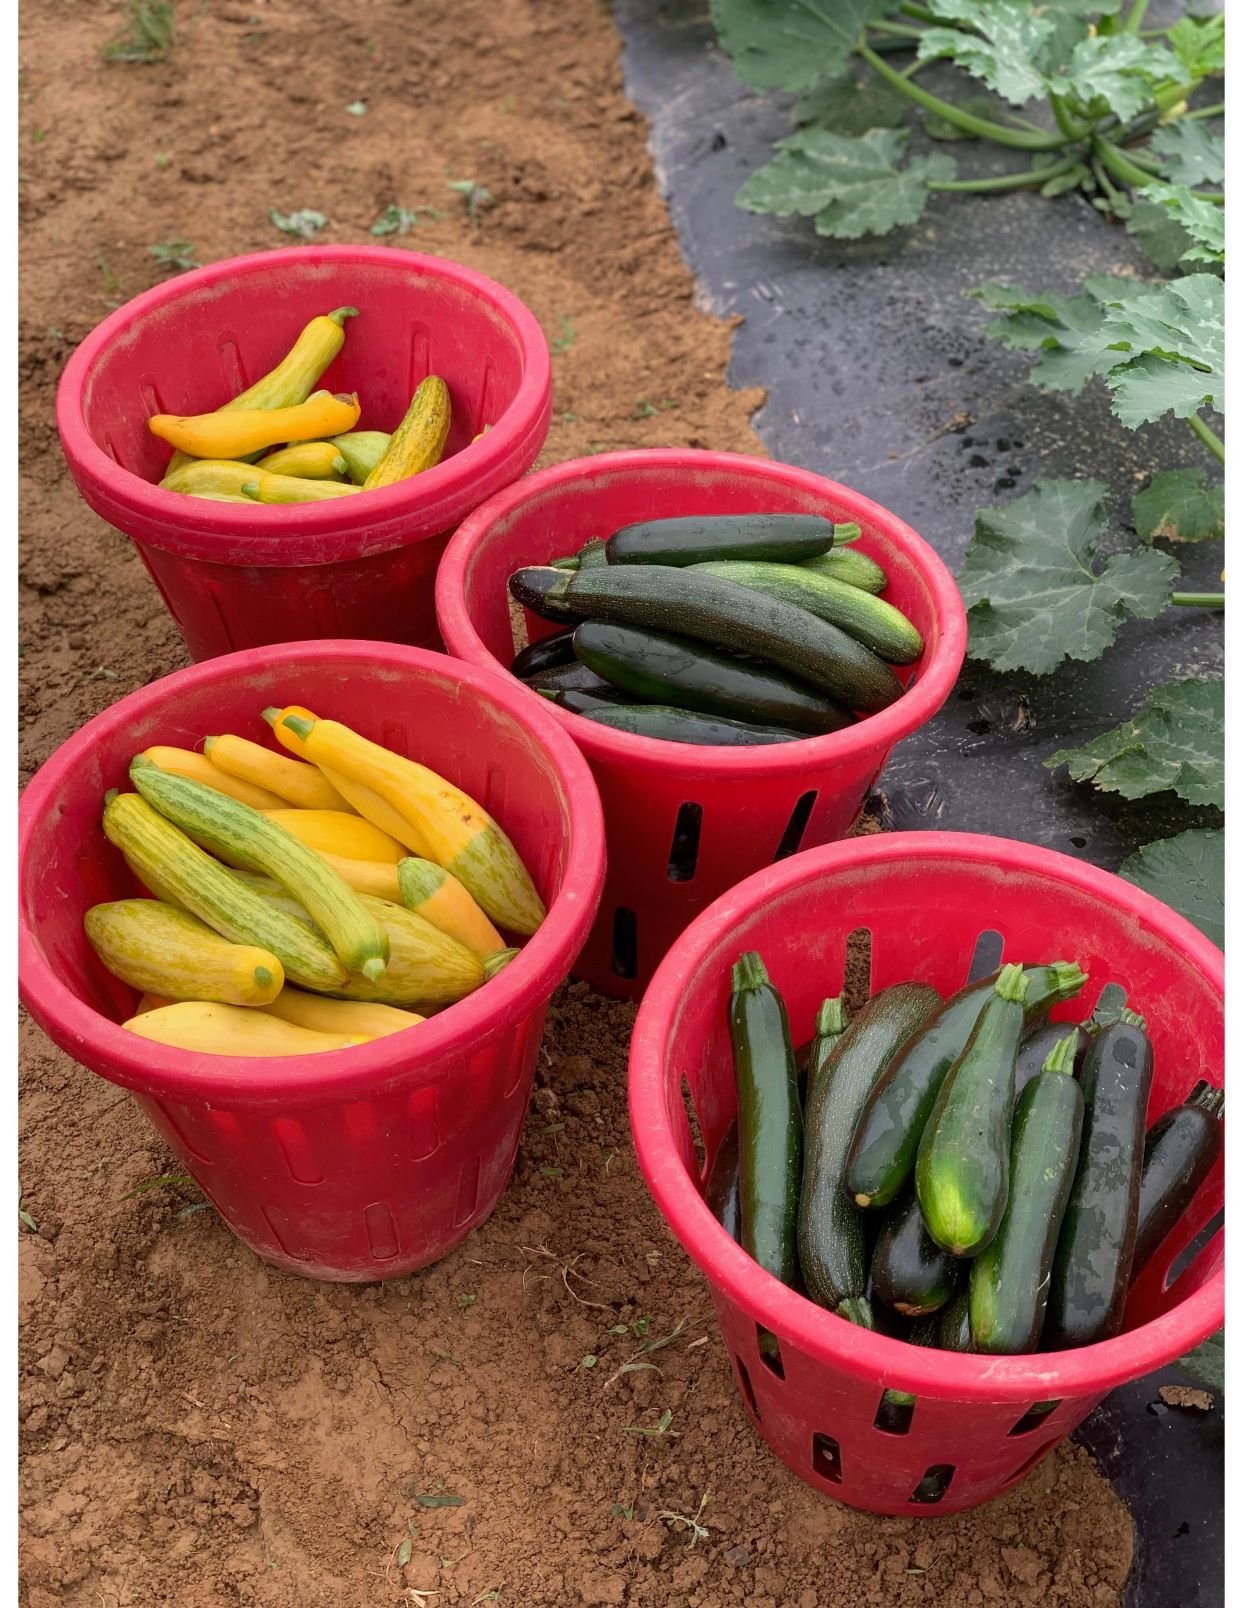 Previous Happening: Tuesday CSA: Dickinson College Farm Field Notes for Week of June 24th